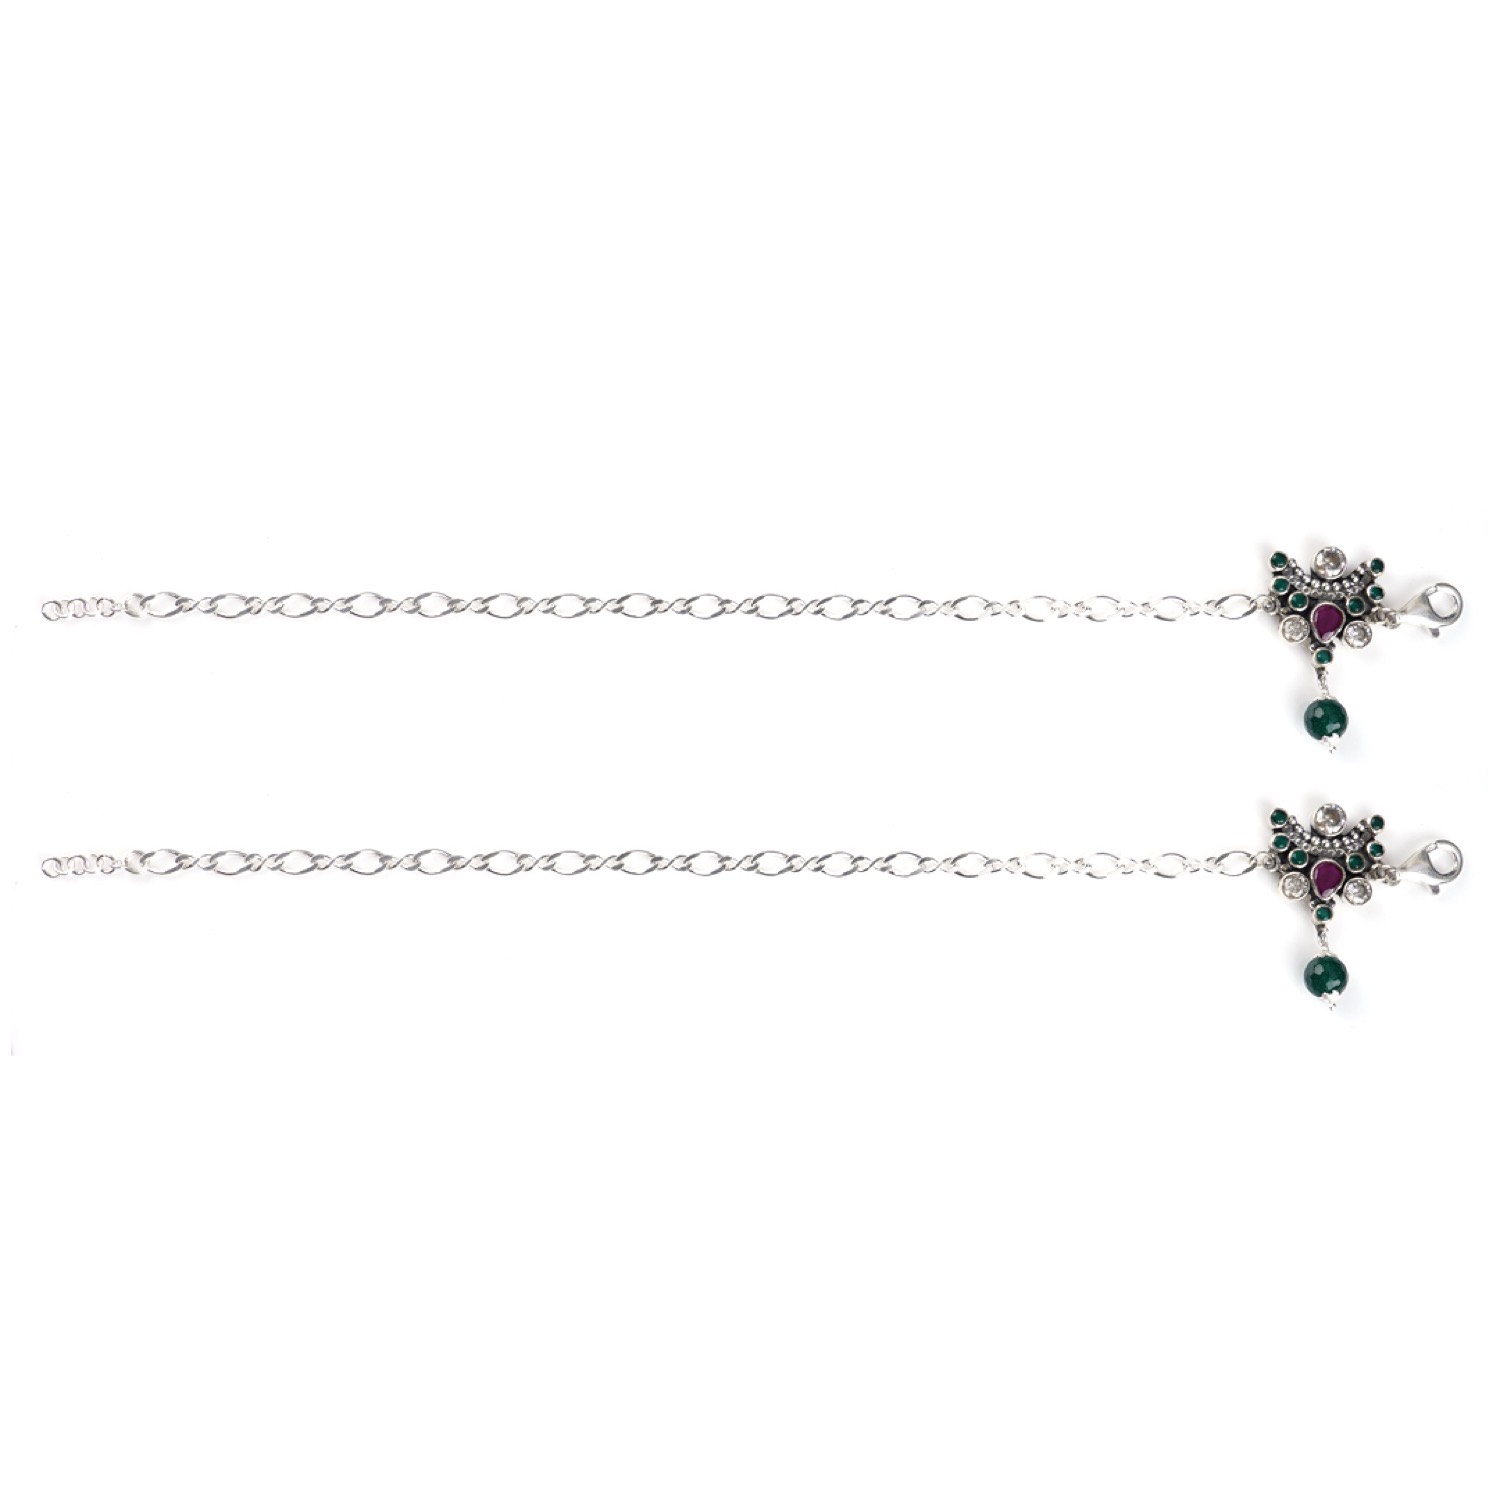 varam_anklets_072022_green_and_red_stone_silver_anklets_7-1